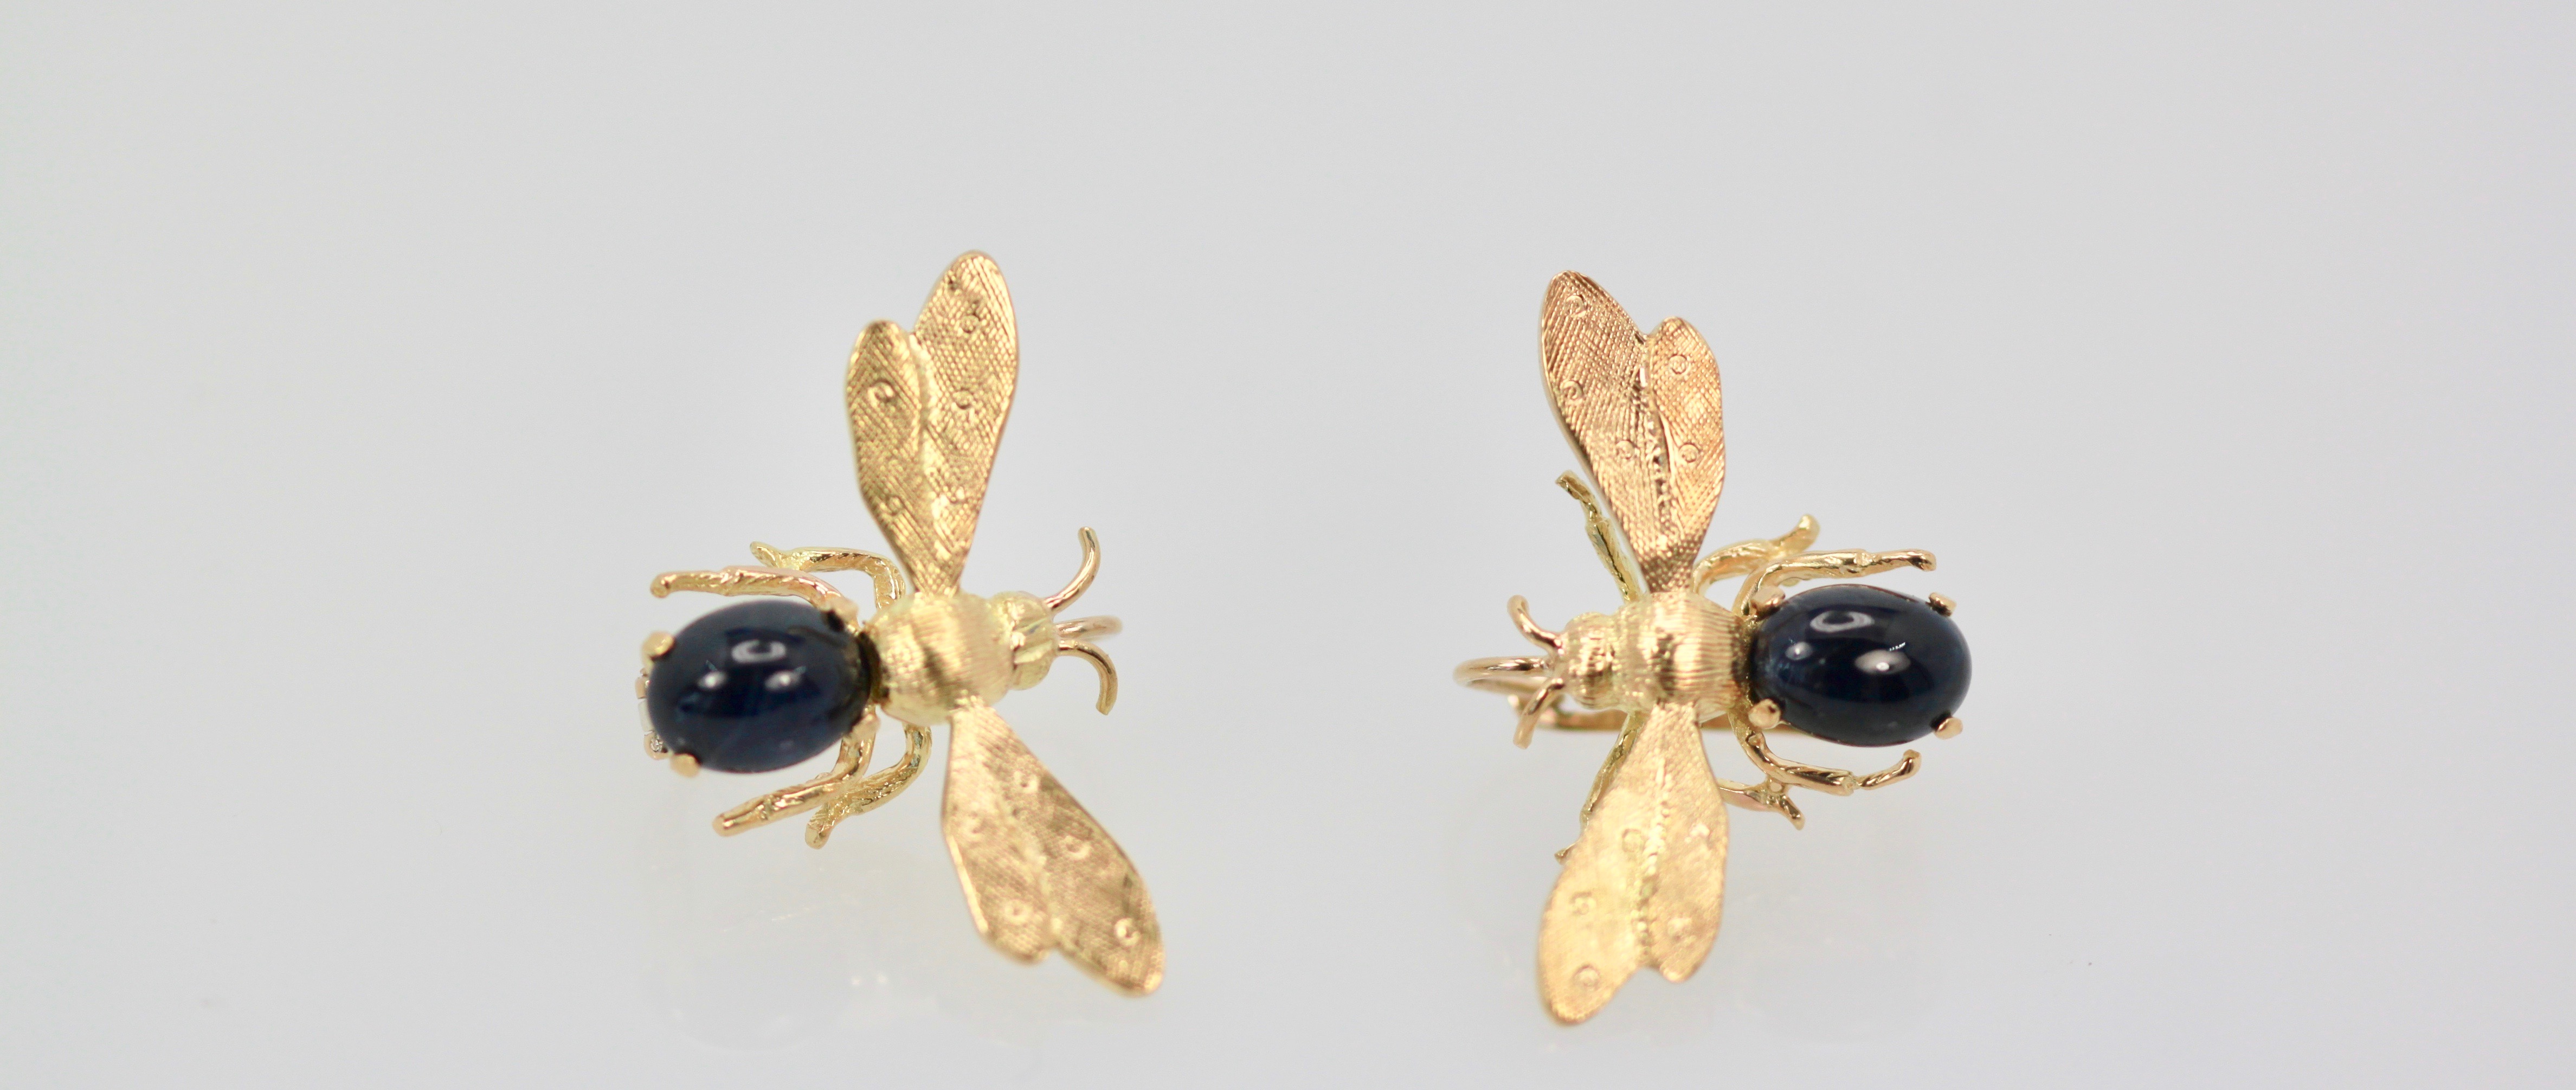 Sapphire Cabochon Fly, Bee, Insect Earrings 18K pair #5